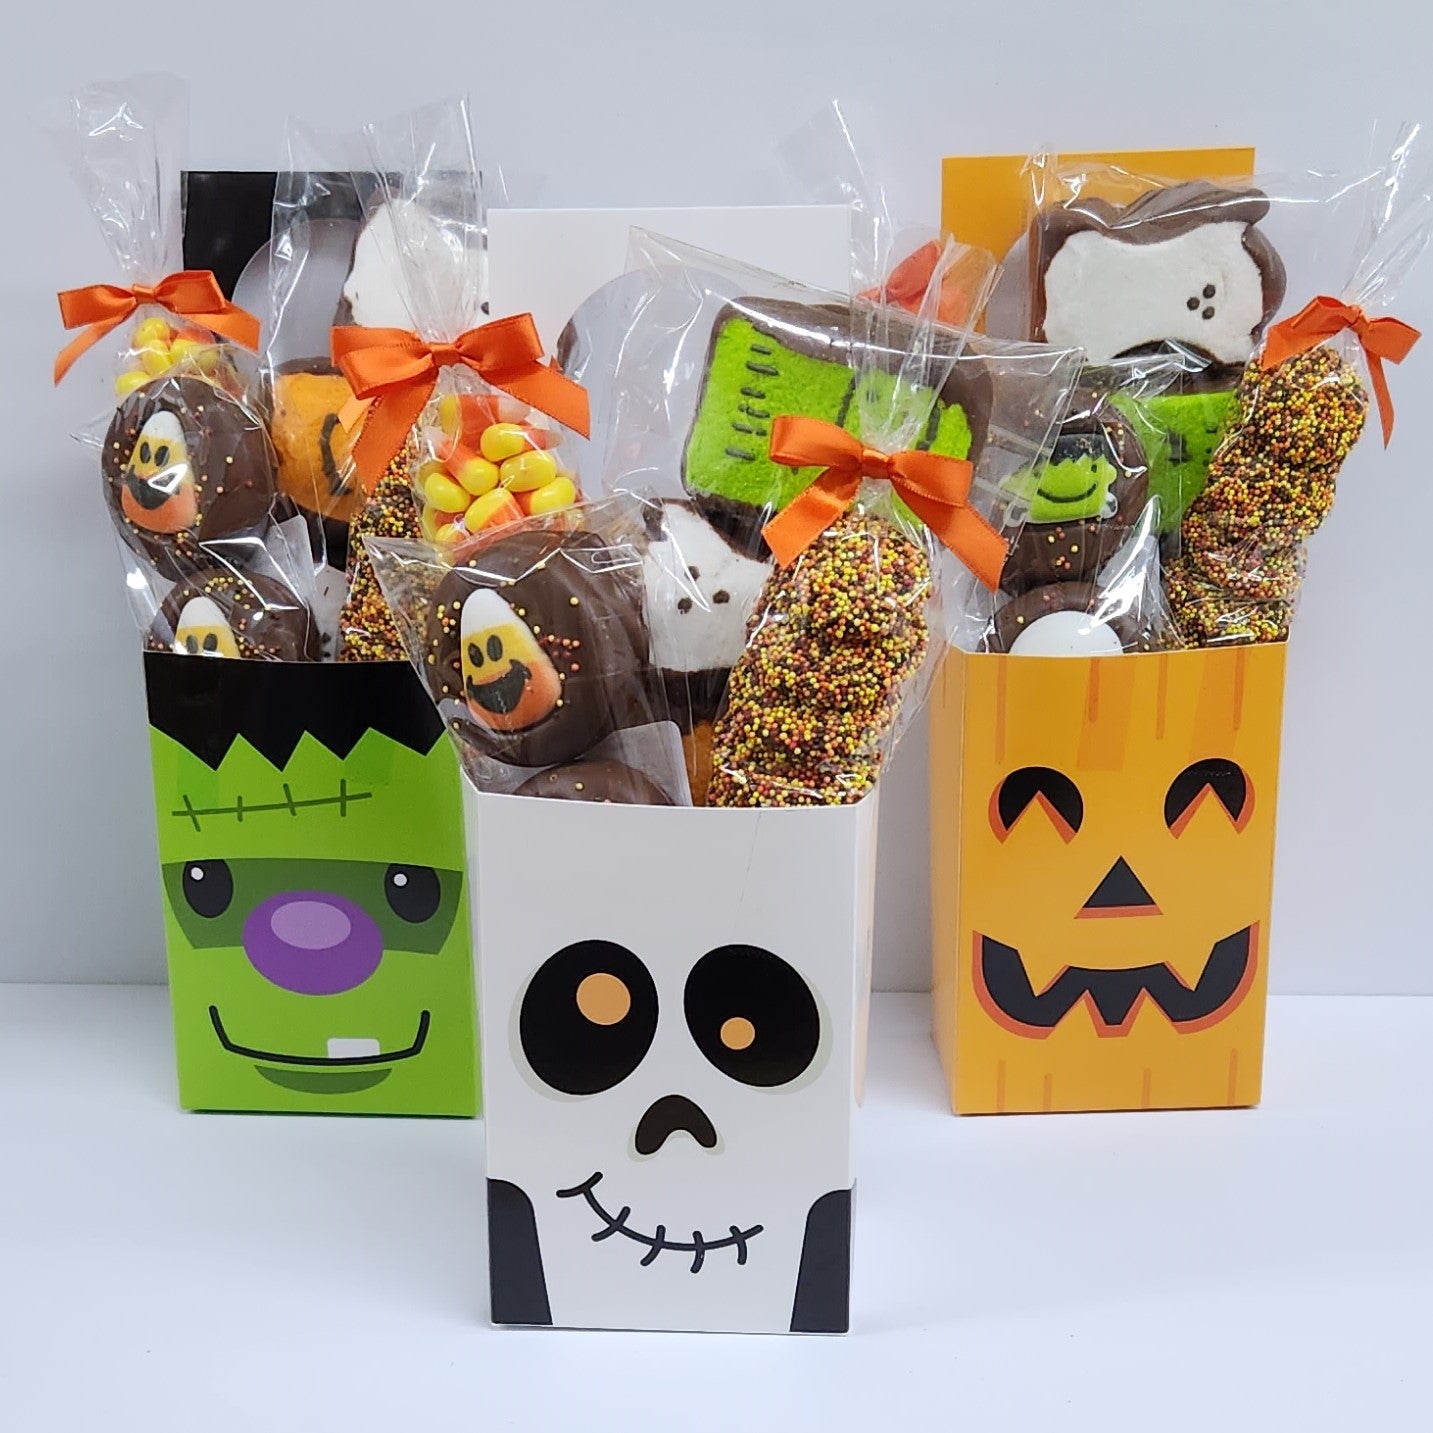 Trio of Stage Stop Candy Door Hangers featuring Candy Corn, Milk Chocolate Nonpareils, Milk Chocolate Oreos dressed up with a Halloween sugar decoration, and Chocolate Covered Peeps